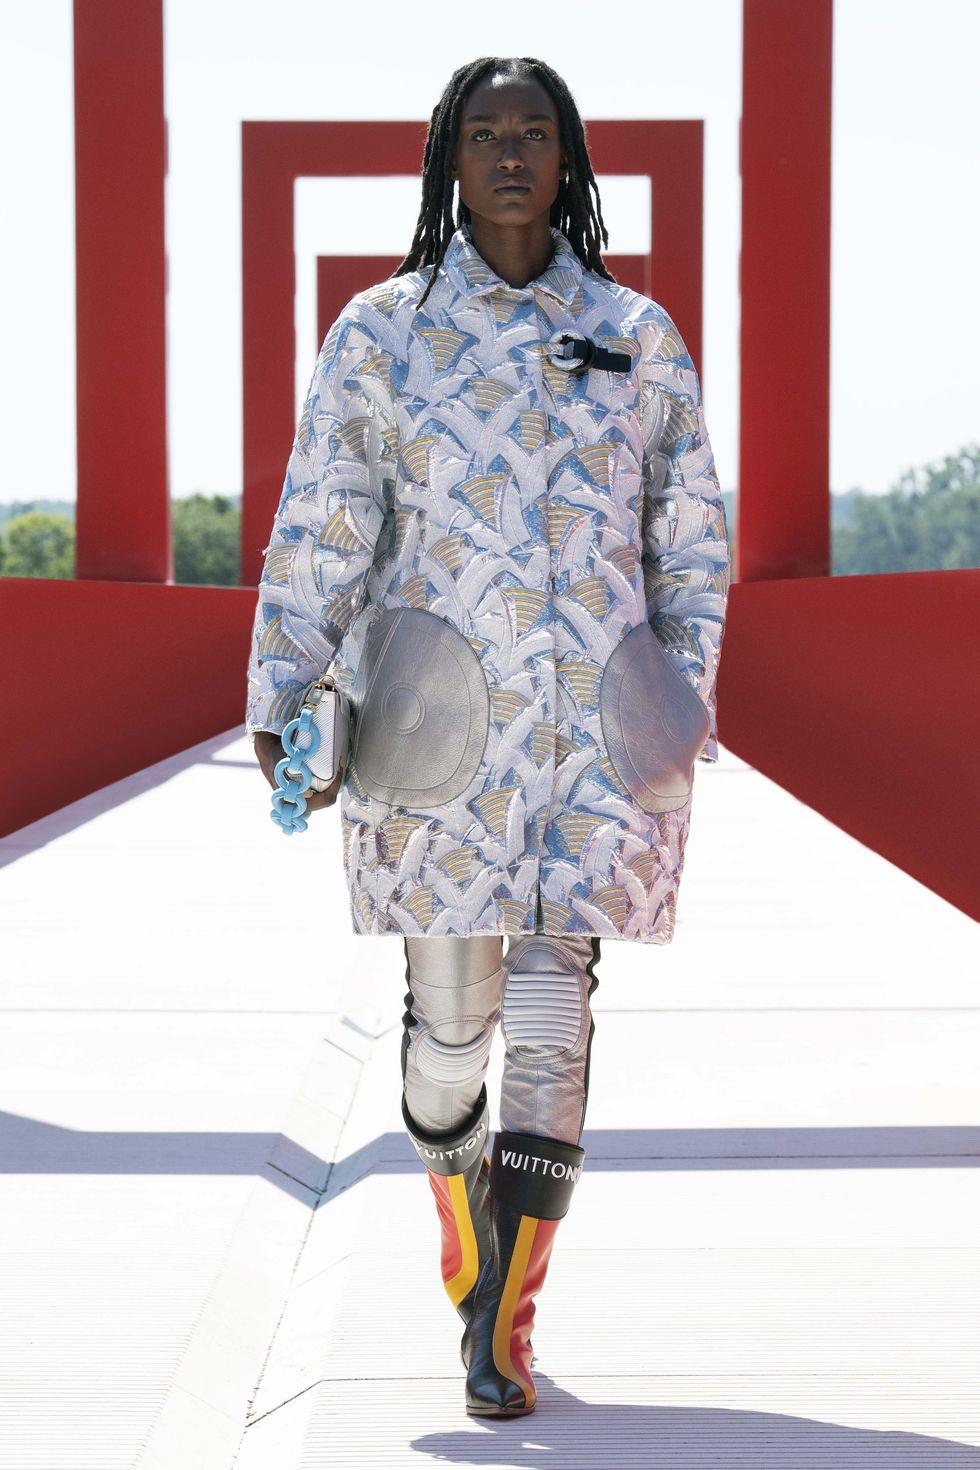 Louis Vuitton: 5 trends from the cruise 2022 show that we already